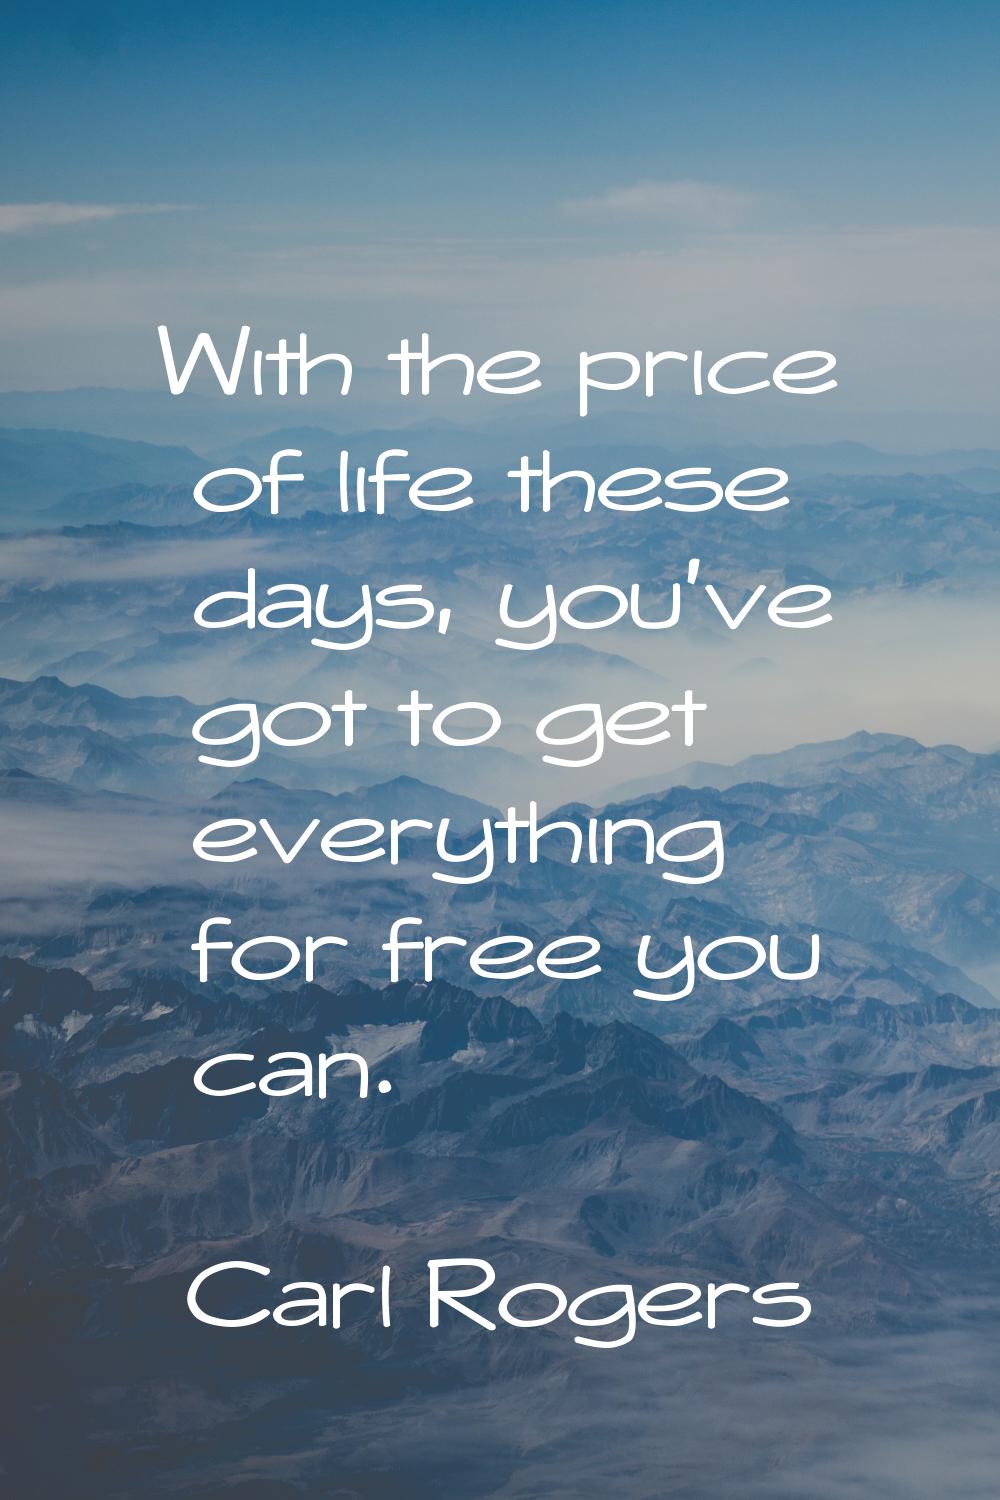 With the price of life these days, you've got to get everything for free you can.